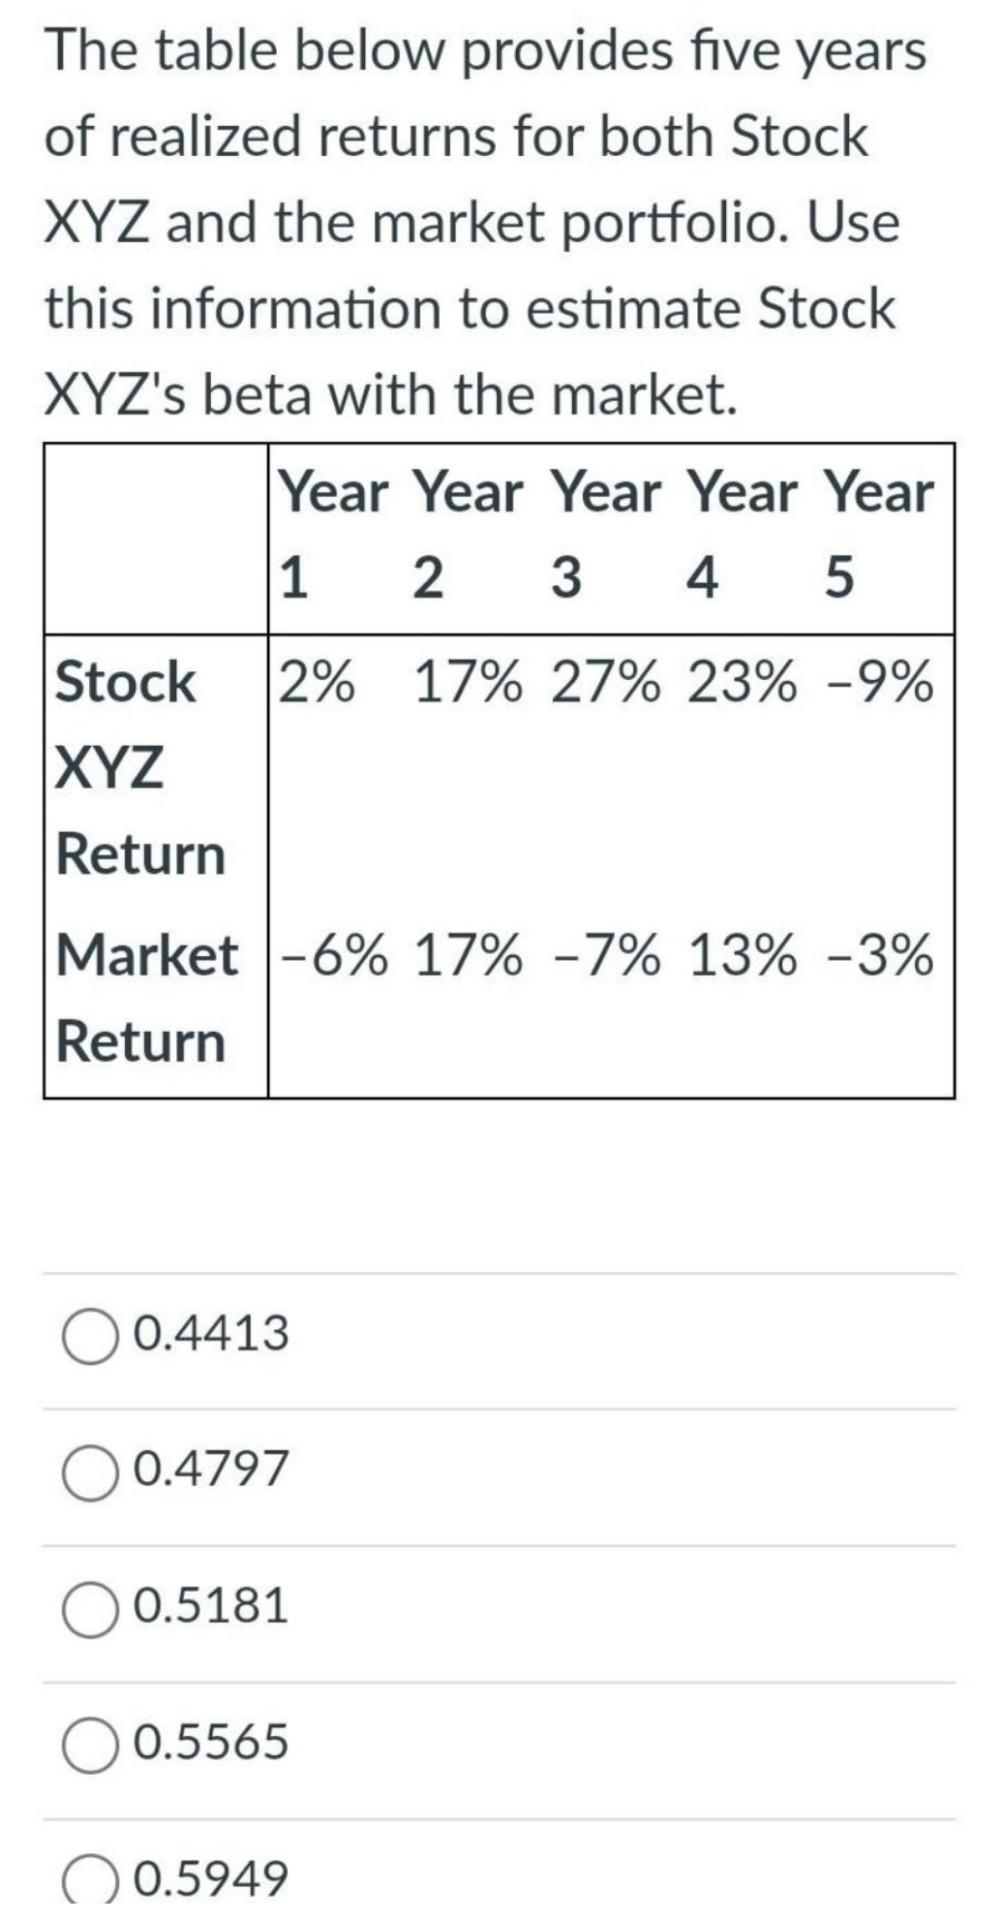 The table below provides five years
of realized returns for both Stock
XYZ and the market portfolio. Use
this information to estimate Stock
XYZ's beta with the market.
Year Year Year Year Year
1
2
3
4
Stock
2% 17% 27% 23% -9%
XYZ
Return
Market -6% 17% -7% 13% -3%
Return
0.4413
0.4797
0.5181
O 0.5565
O 0.5949
